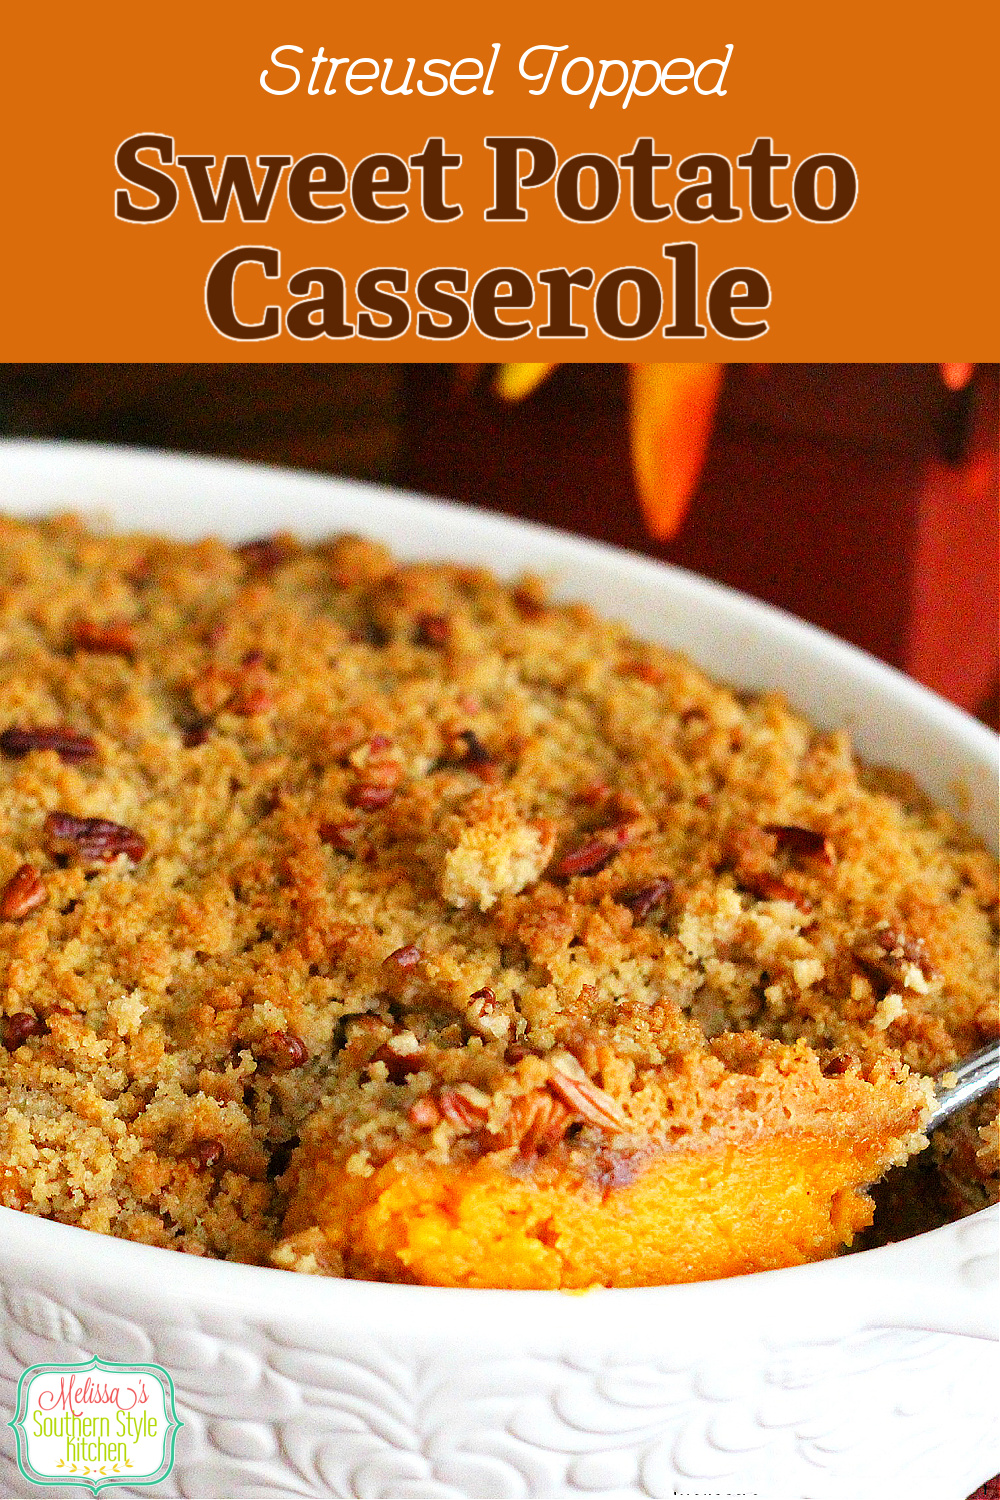 The dreamy filling pairs perfectly with the crunchy pecan streusel on top of this Sweet Potato Casserole #sweetpotatocasserole #sweetpotatoes #casseroles #thanksgivingsides #holidayrecipes #sweetpotatorecipes #potatocasserole #southernfood #southernrecipes via @melissasssk